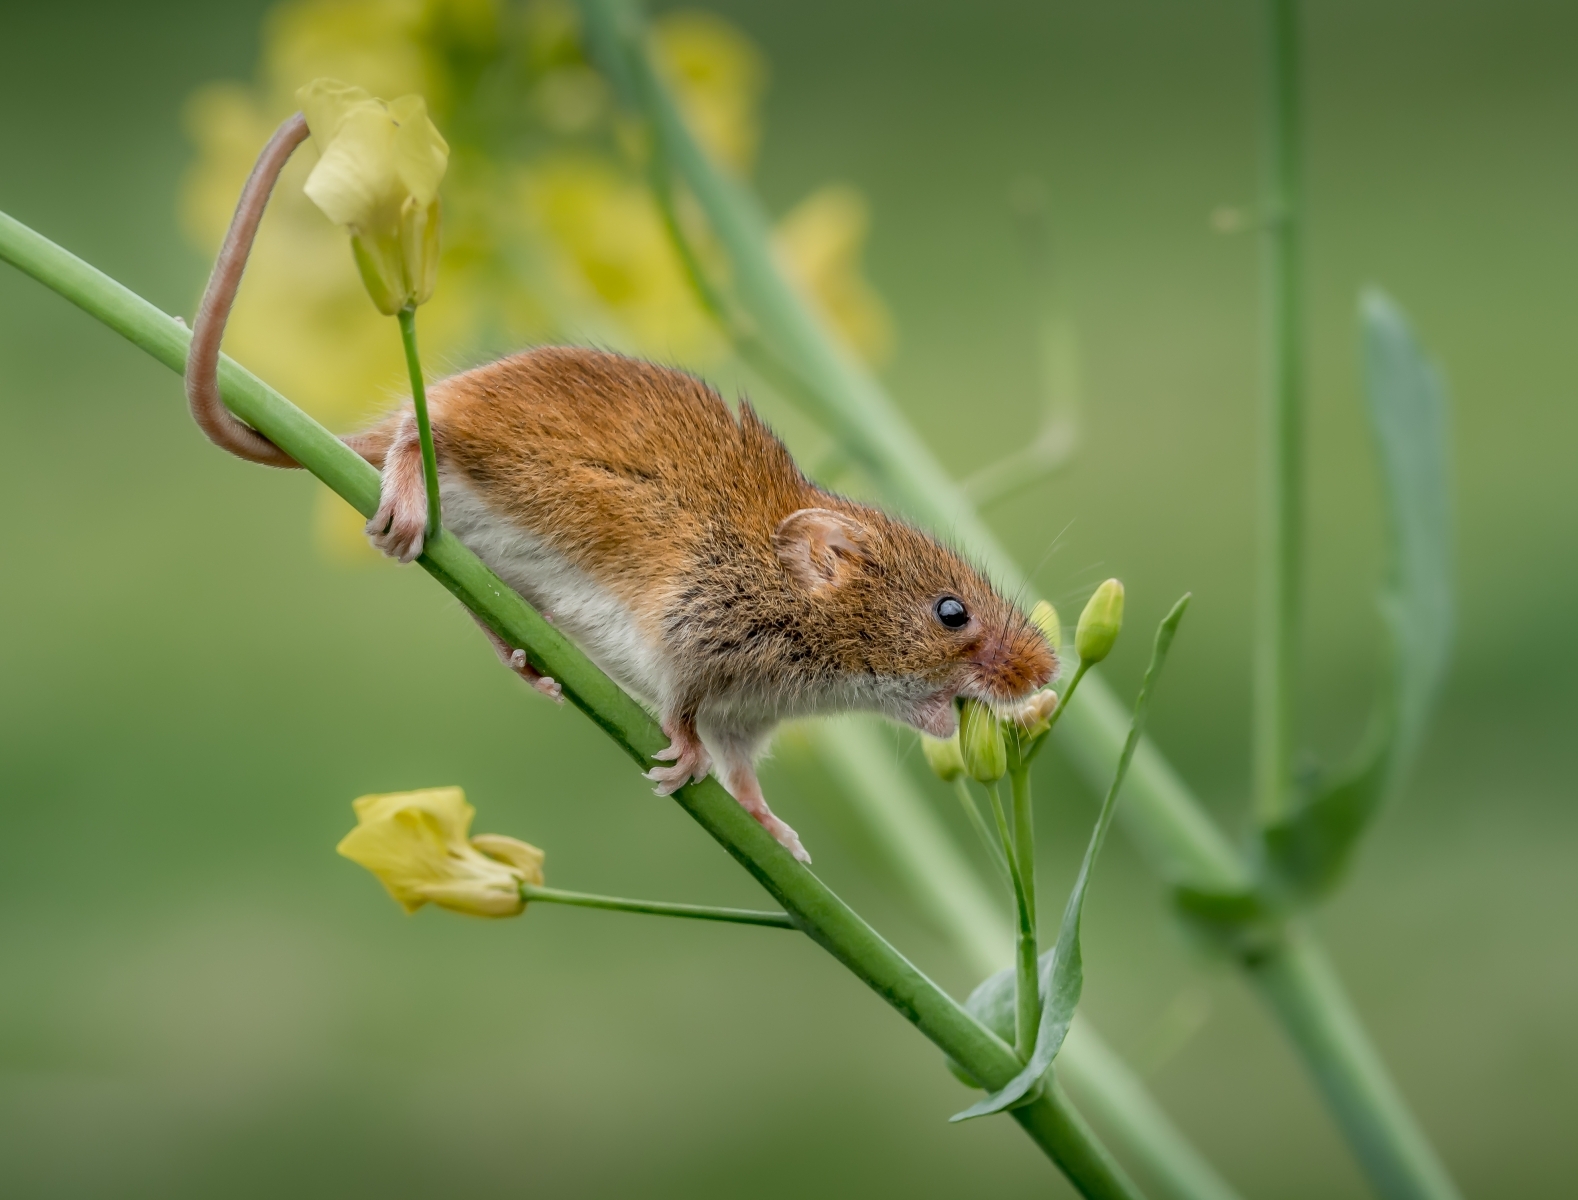 3rd: Harvest Mouse - David Walters